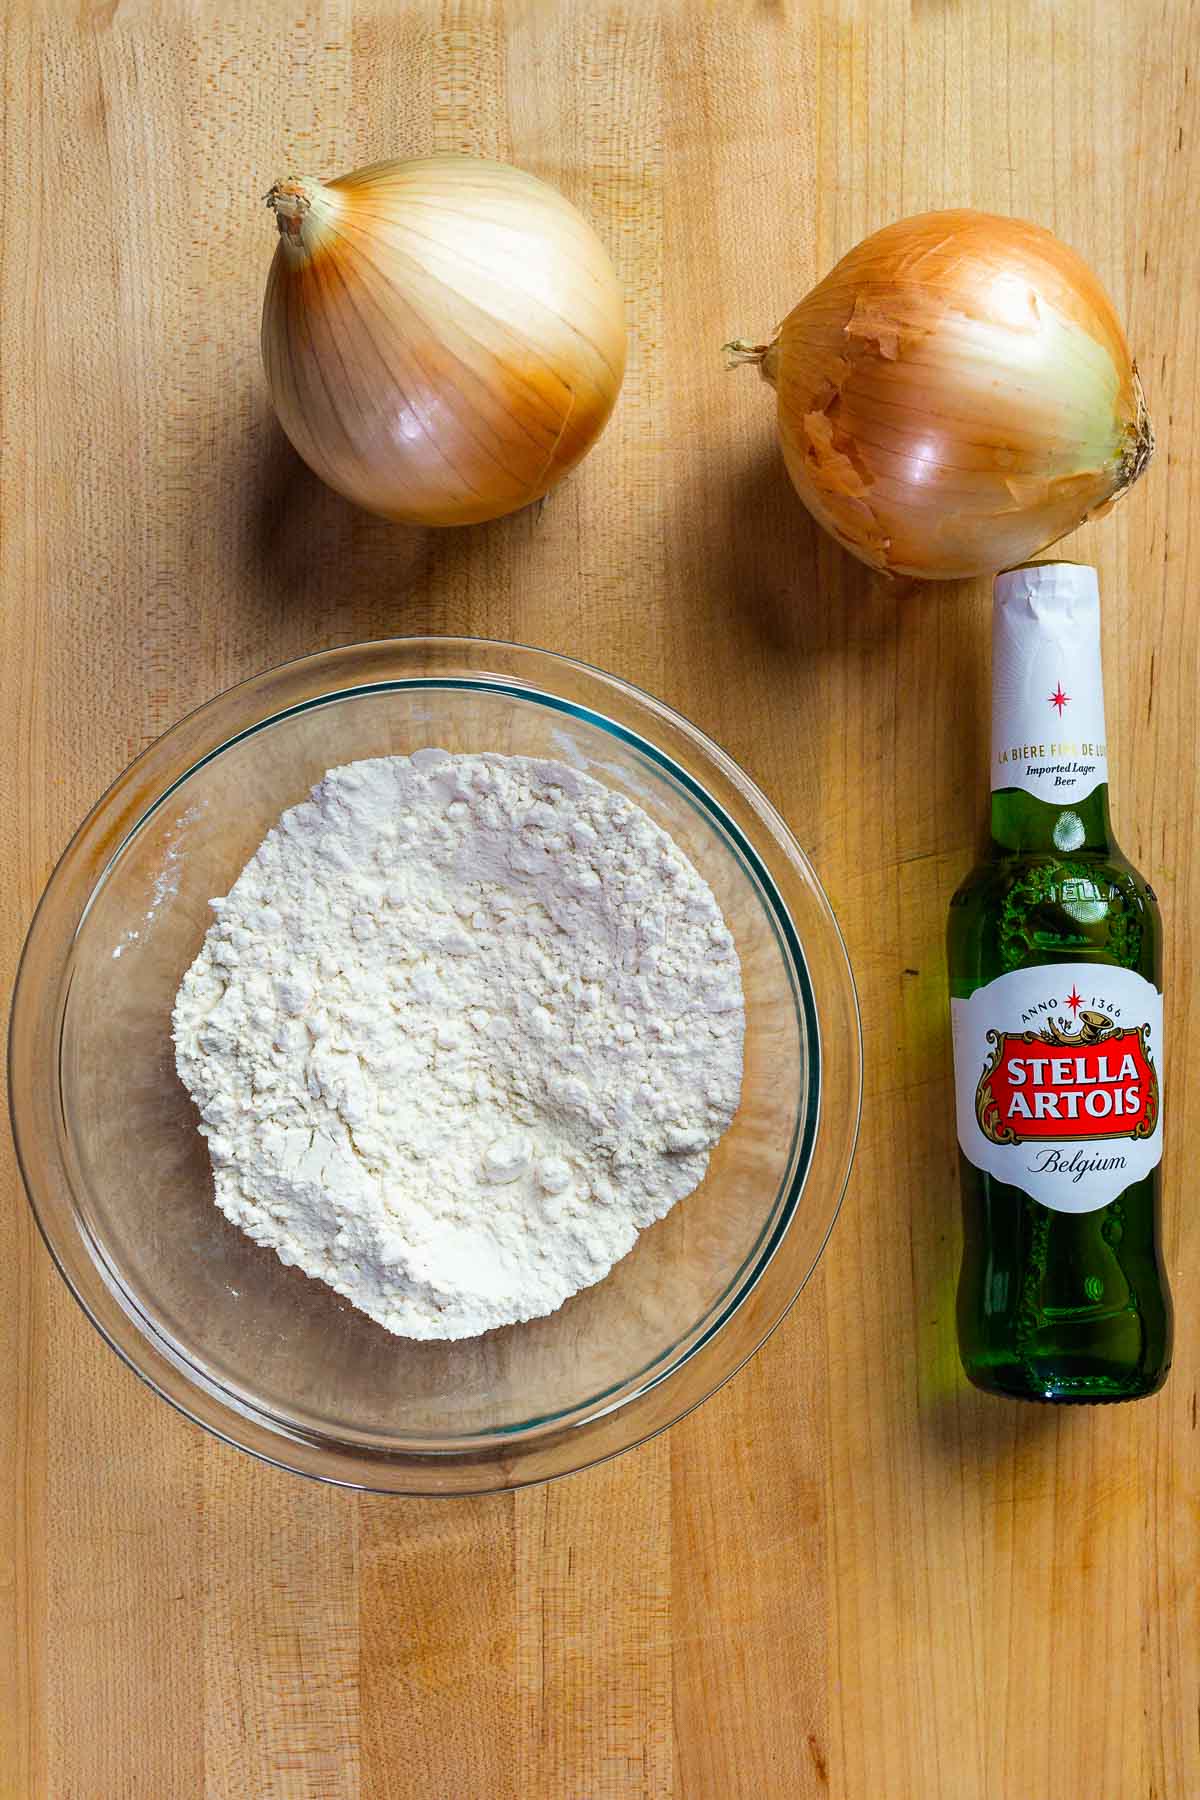 Two large onions, bowl of flour, and bottle of beer on wood cutting board.